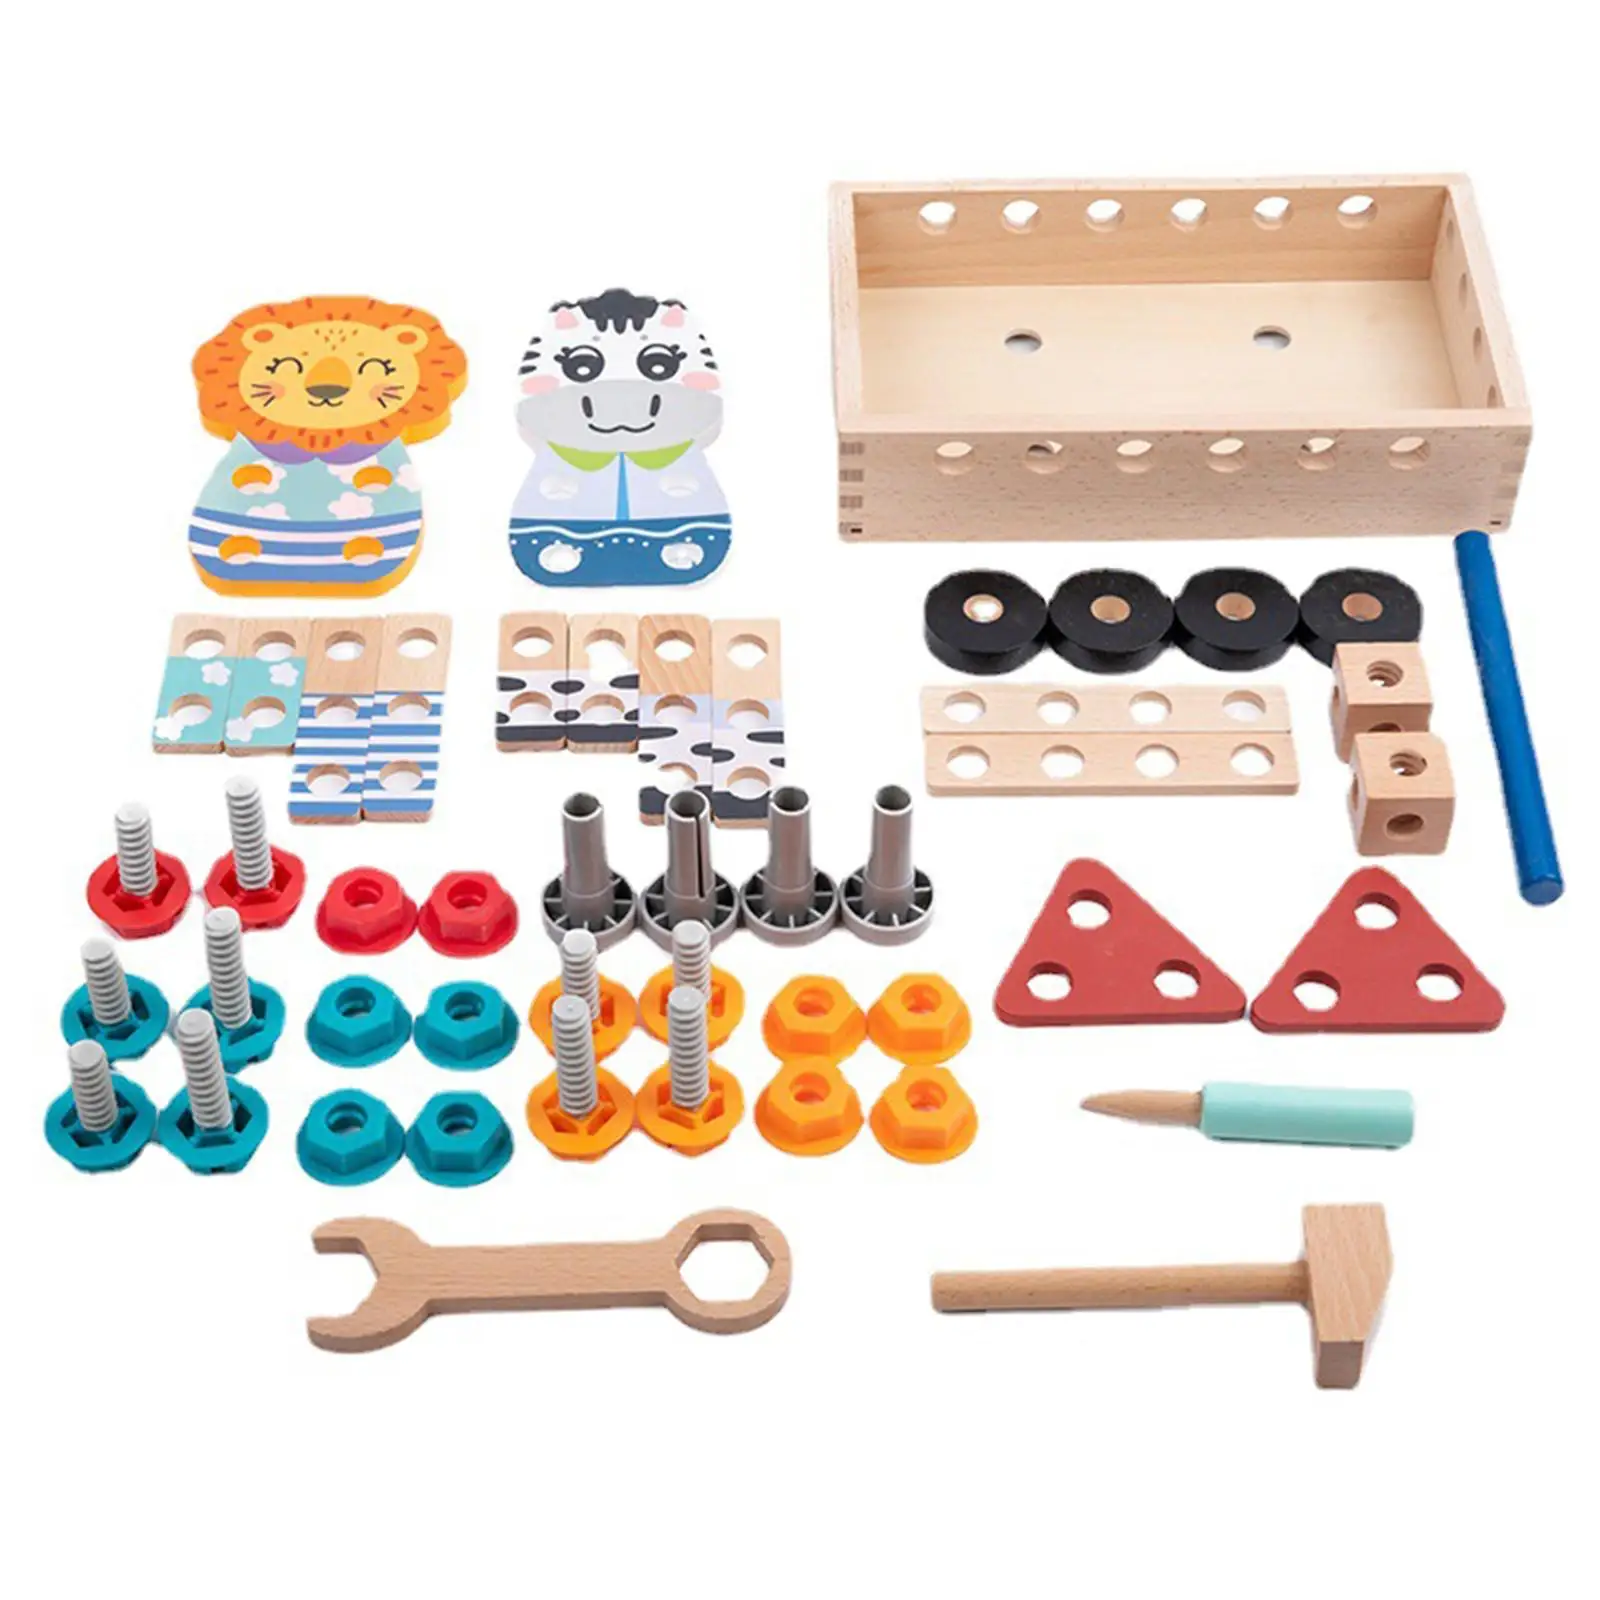 Construction Building Toy Toddler Tool Set for Preschool Role education